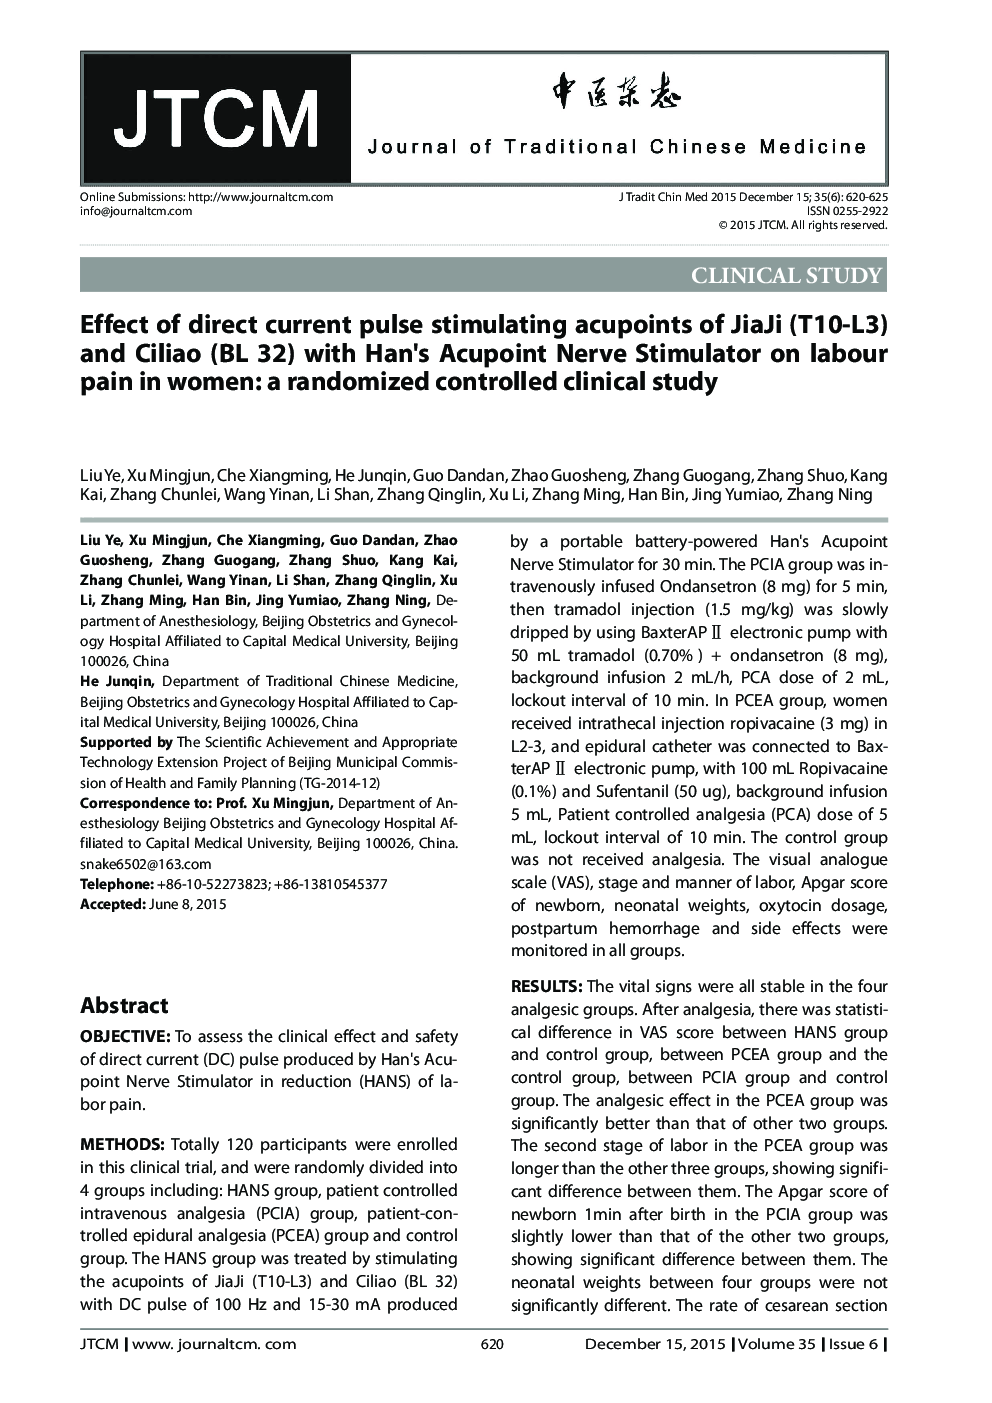 Effect of direct current pulse stimulating acupoints of JiaJi (T10-L3) and Ciliao (BL 32) with Han's Acupoint Nerve Stimulator on labour pain in women: a randomized controlled clinical study 